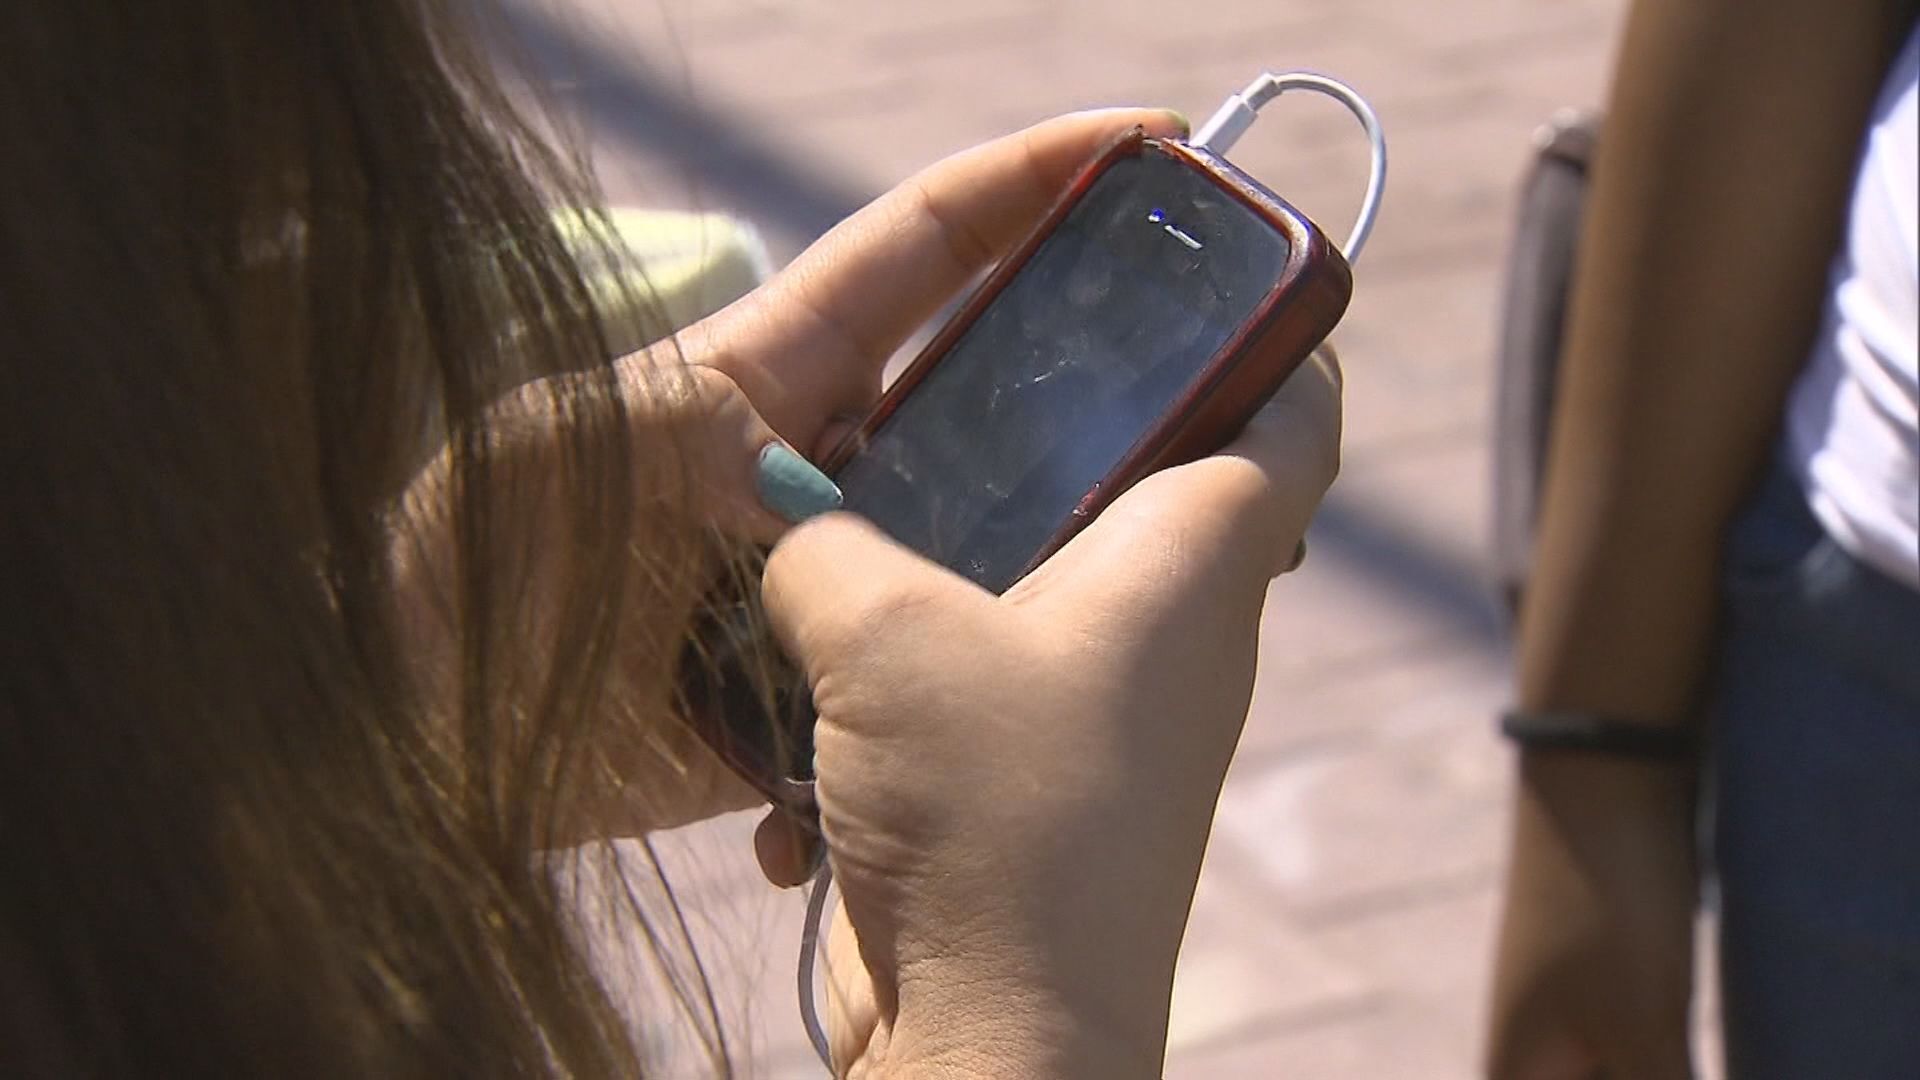 Research suggests setting boundaries for cell phone use among kids